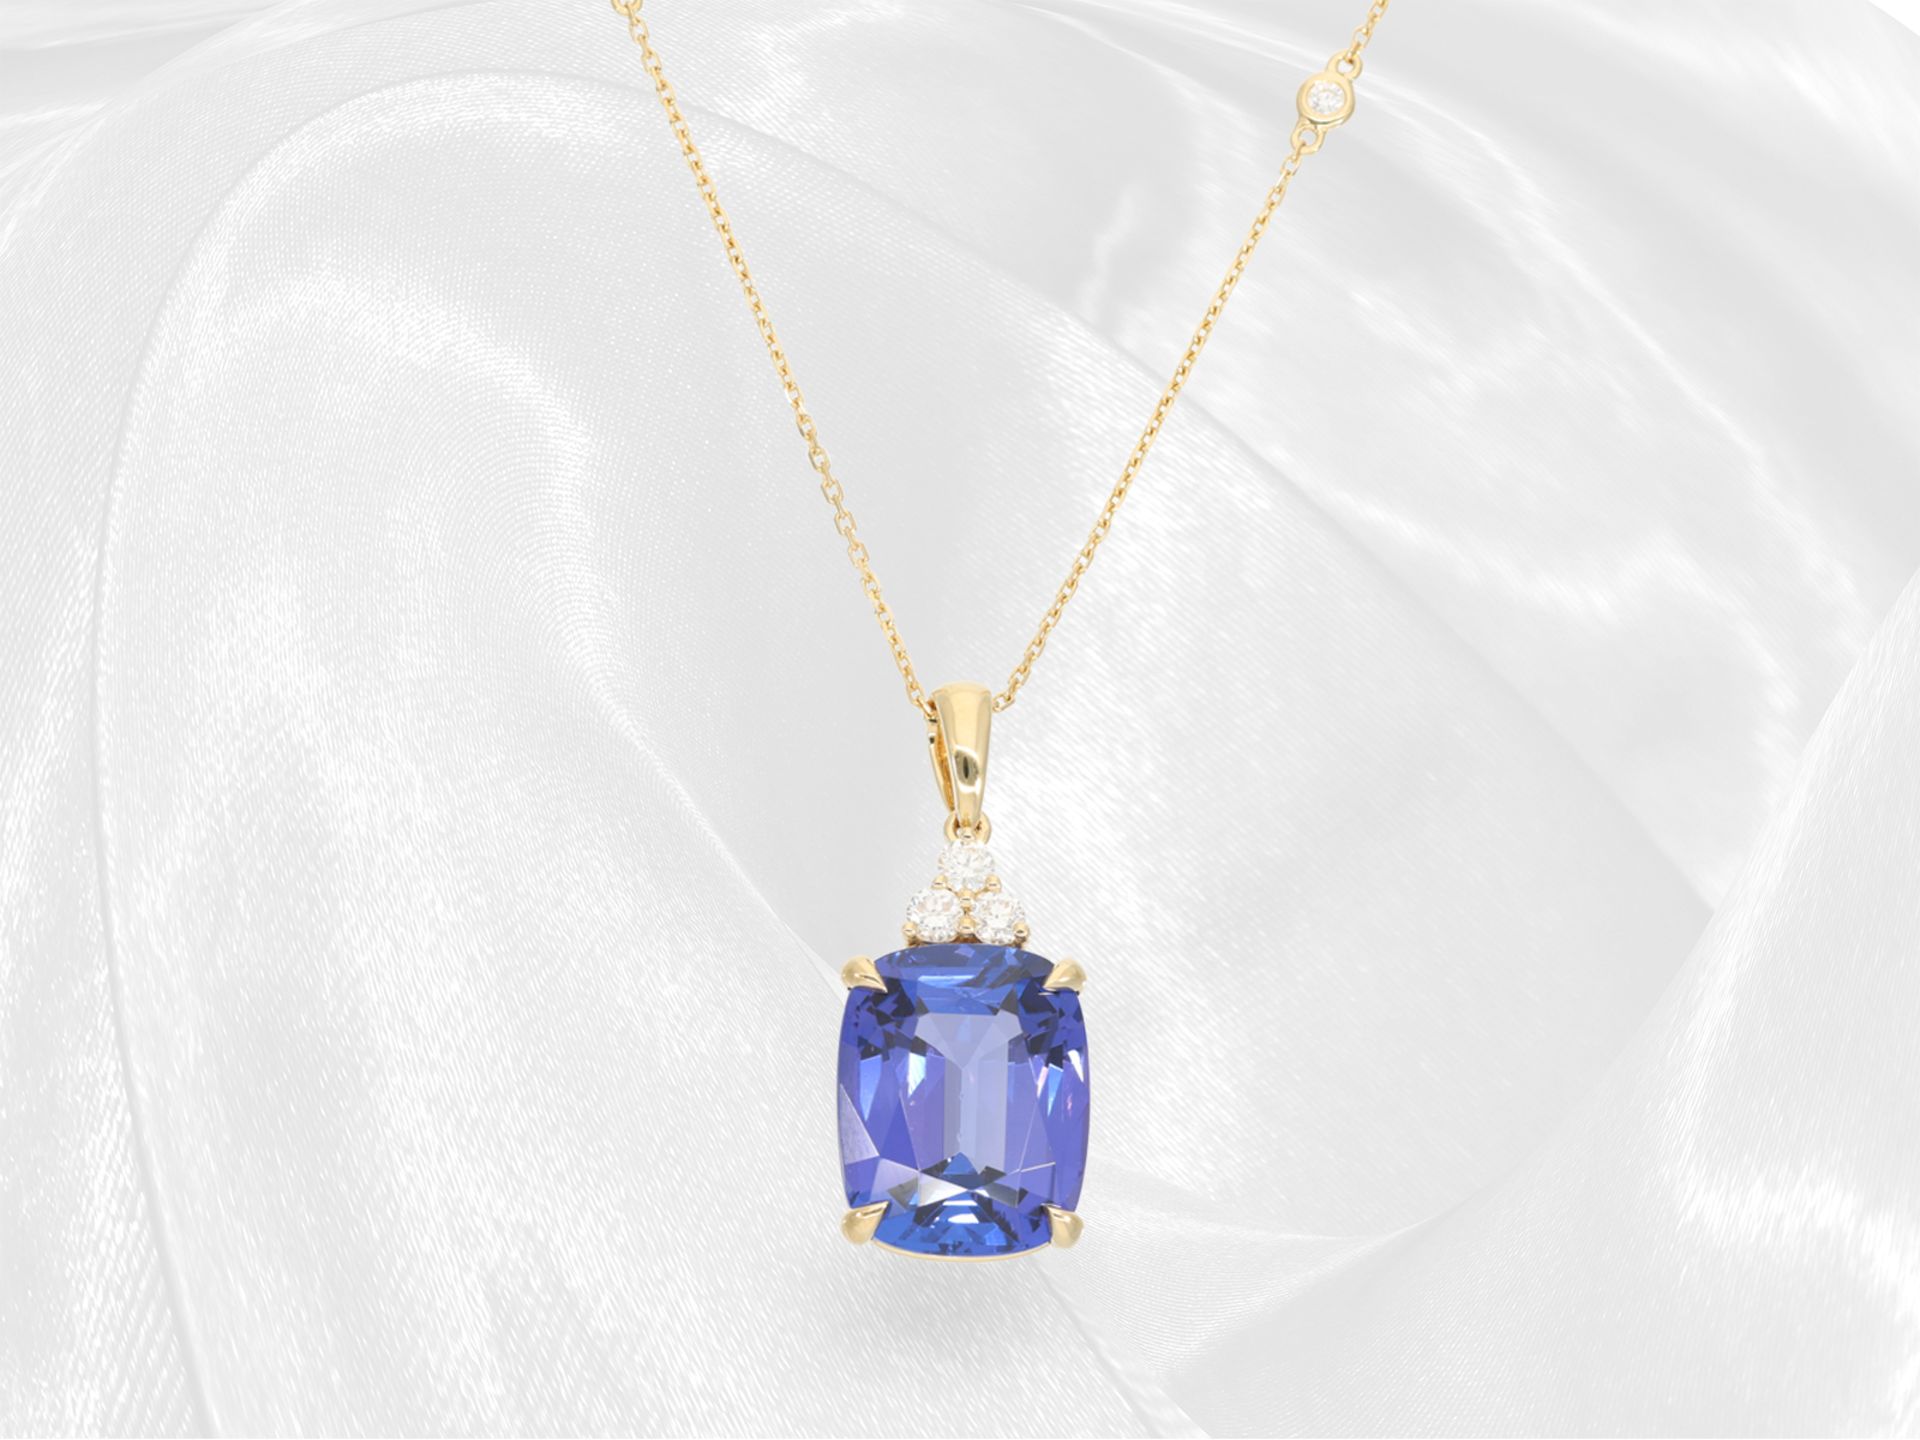 Exclusive, like new tanzanite/brilliant-cut diamond necklace with large tanzanite of 11.15ct in very